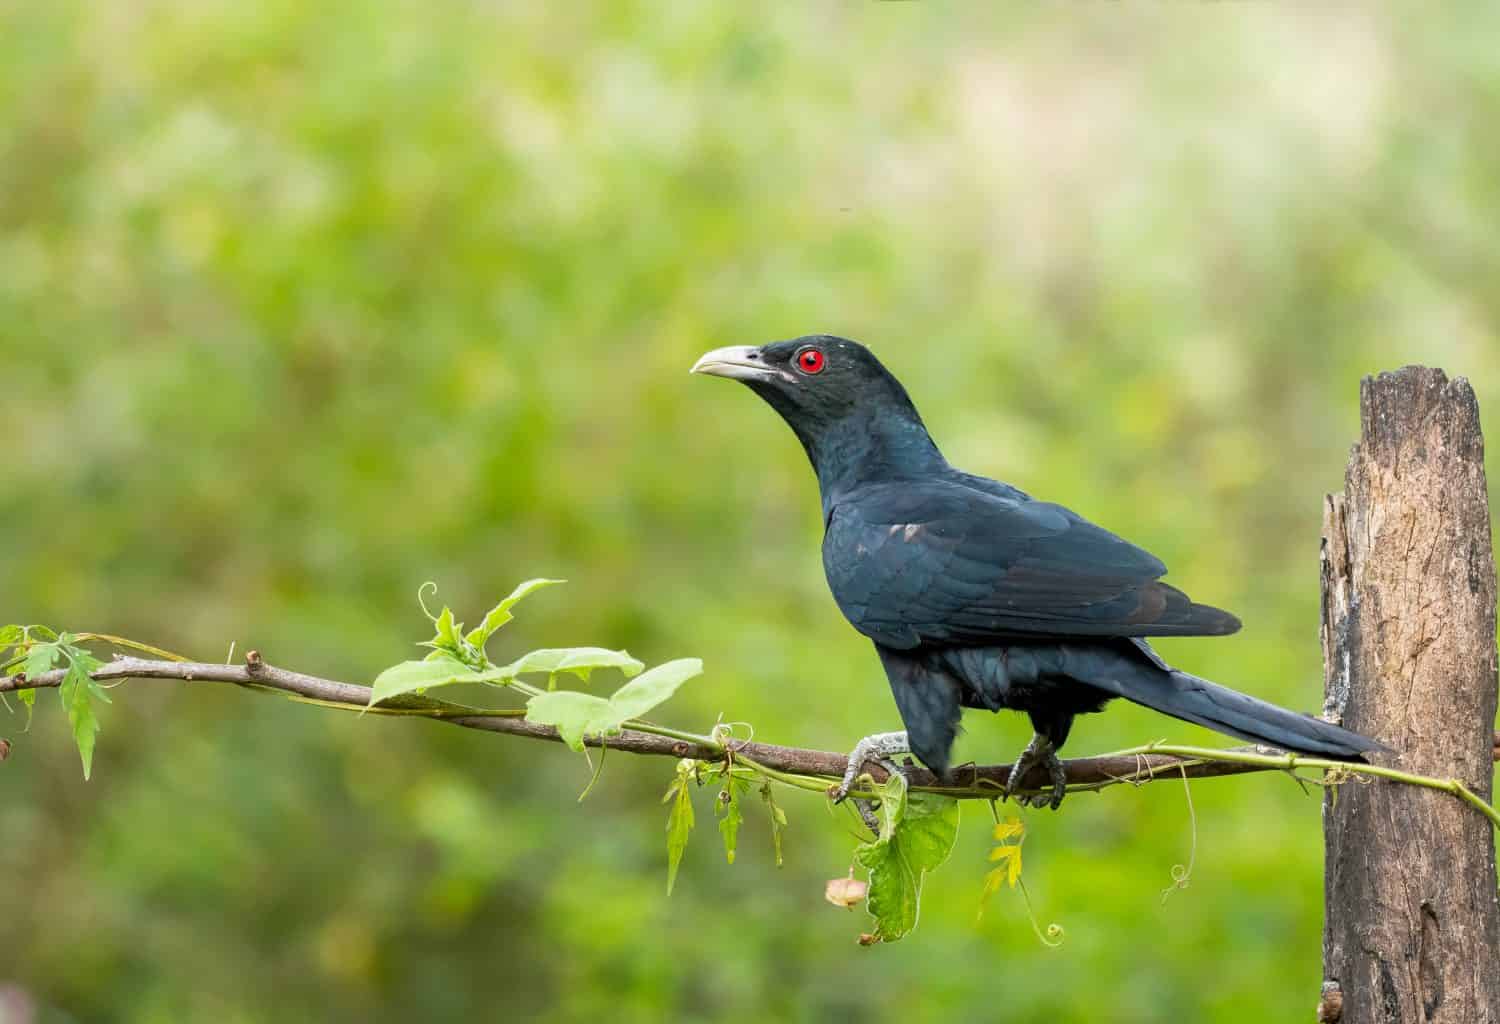 A male Indian Koel bird perched on a branch in the arid jungles on the outskirts of Bangalore in November 2020